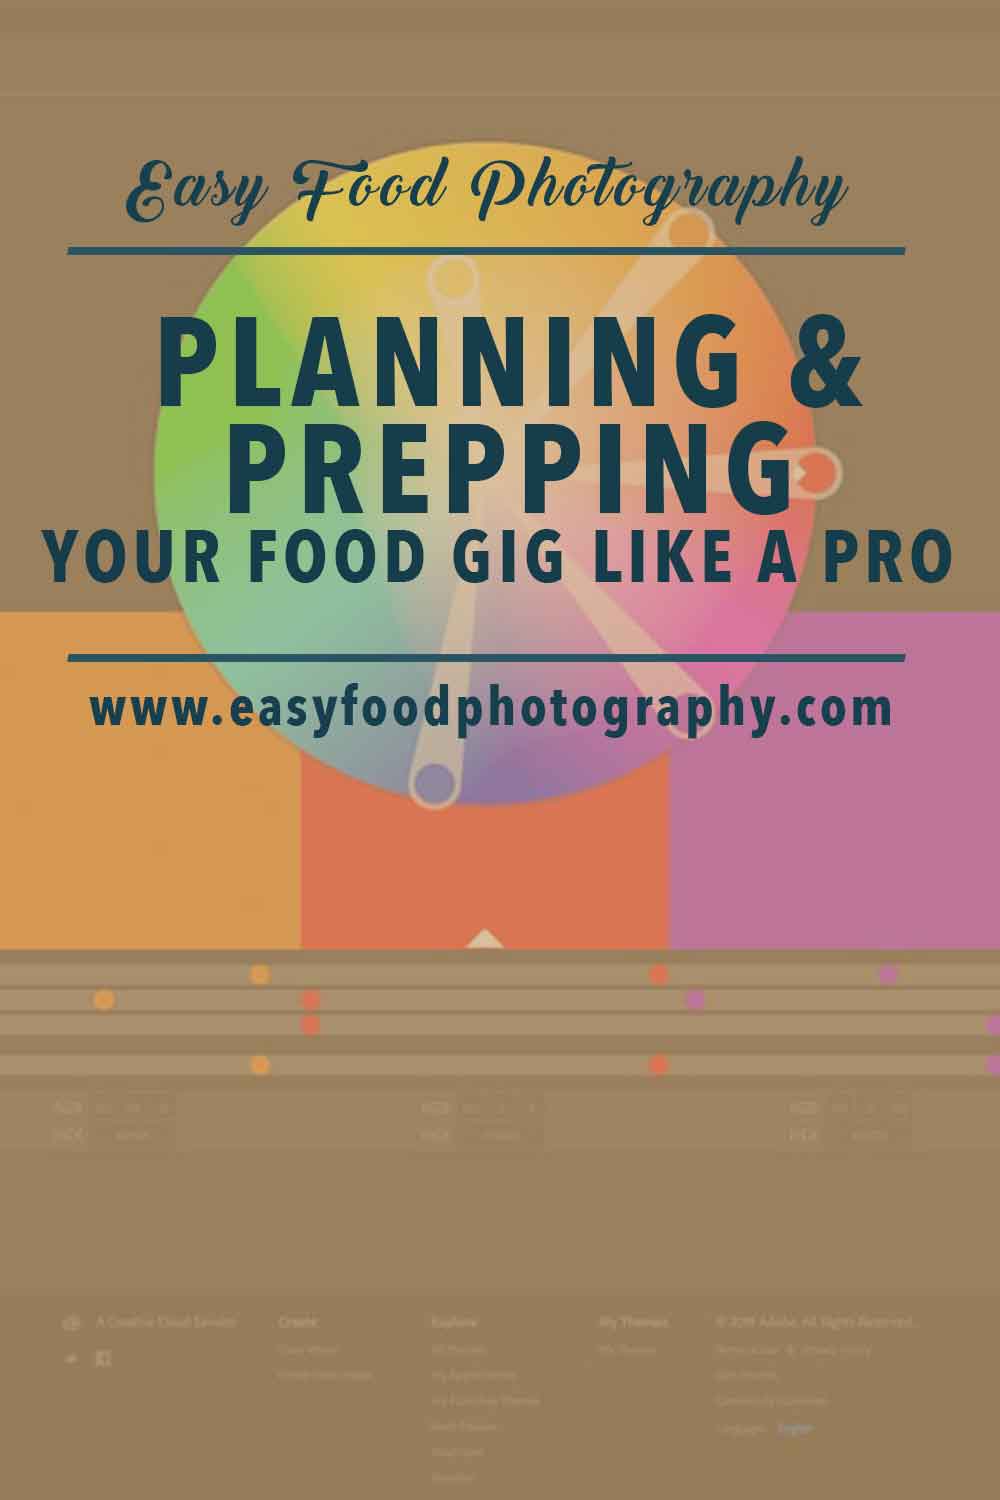 PLANNING & PREPPING YOUR FOOD GIG LIKE A PRO